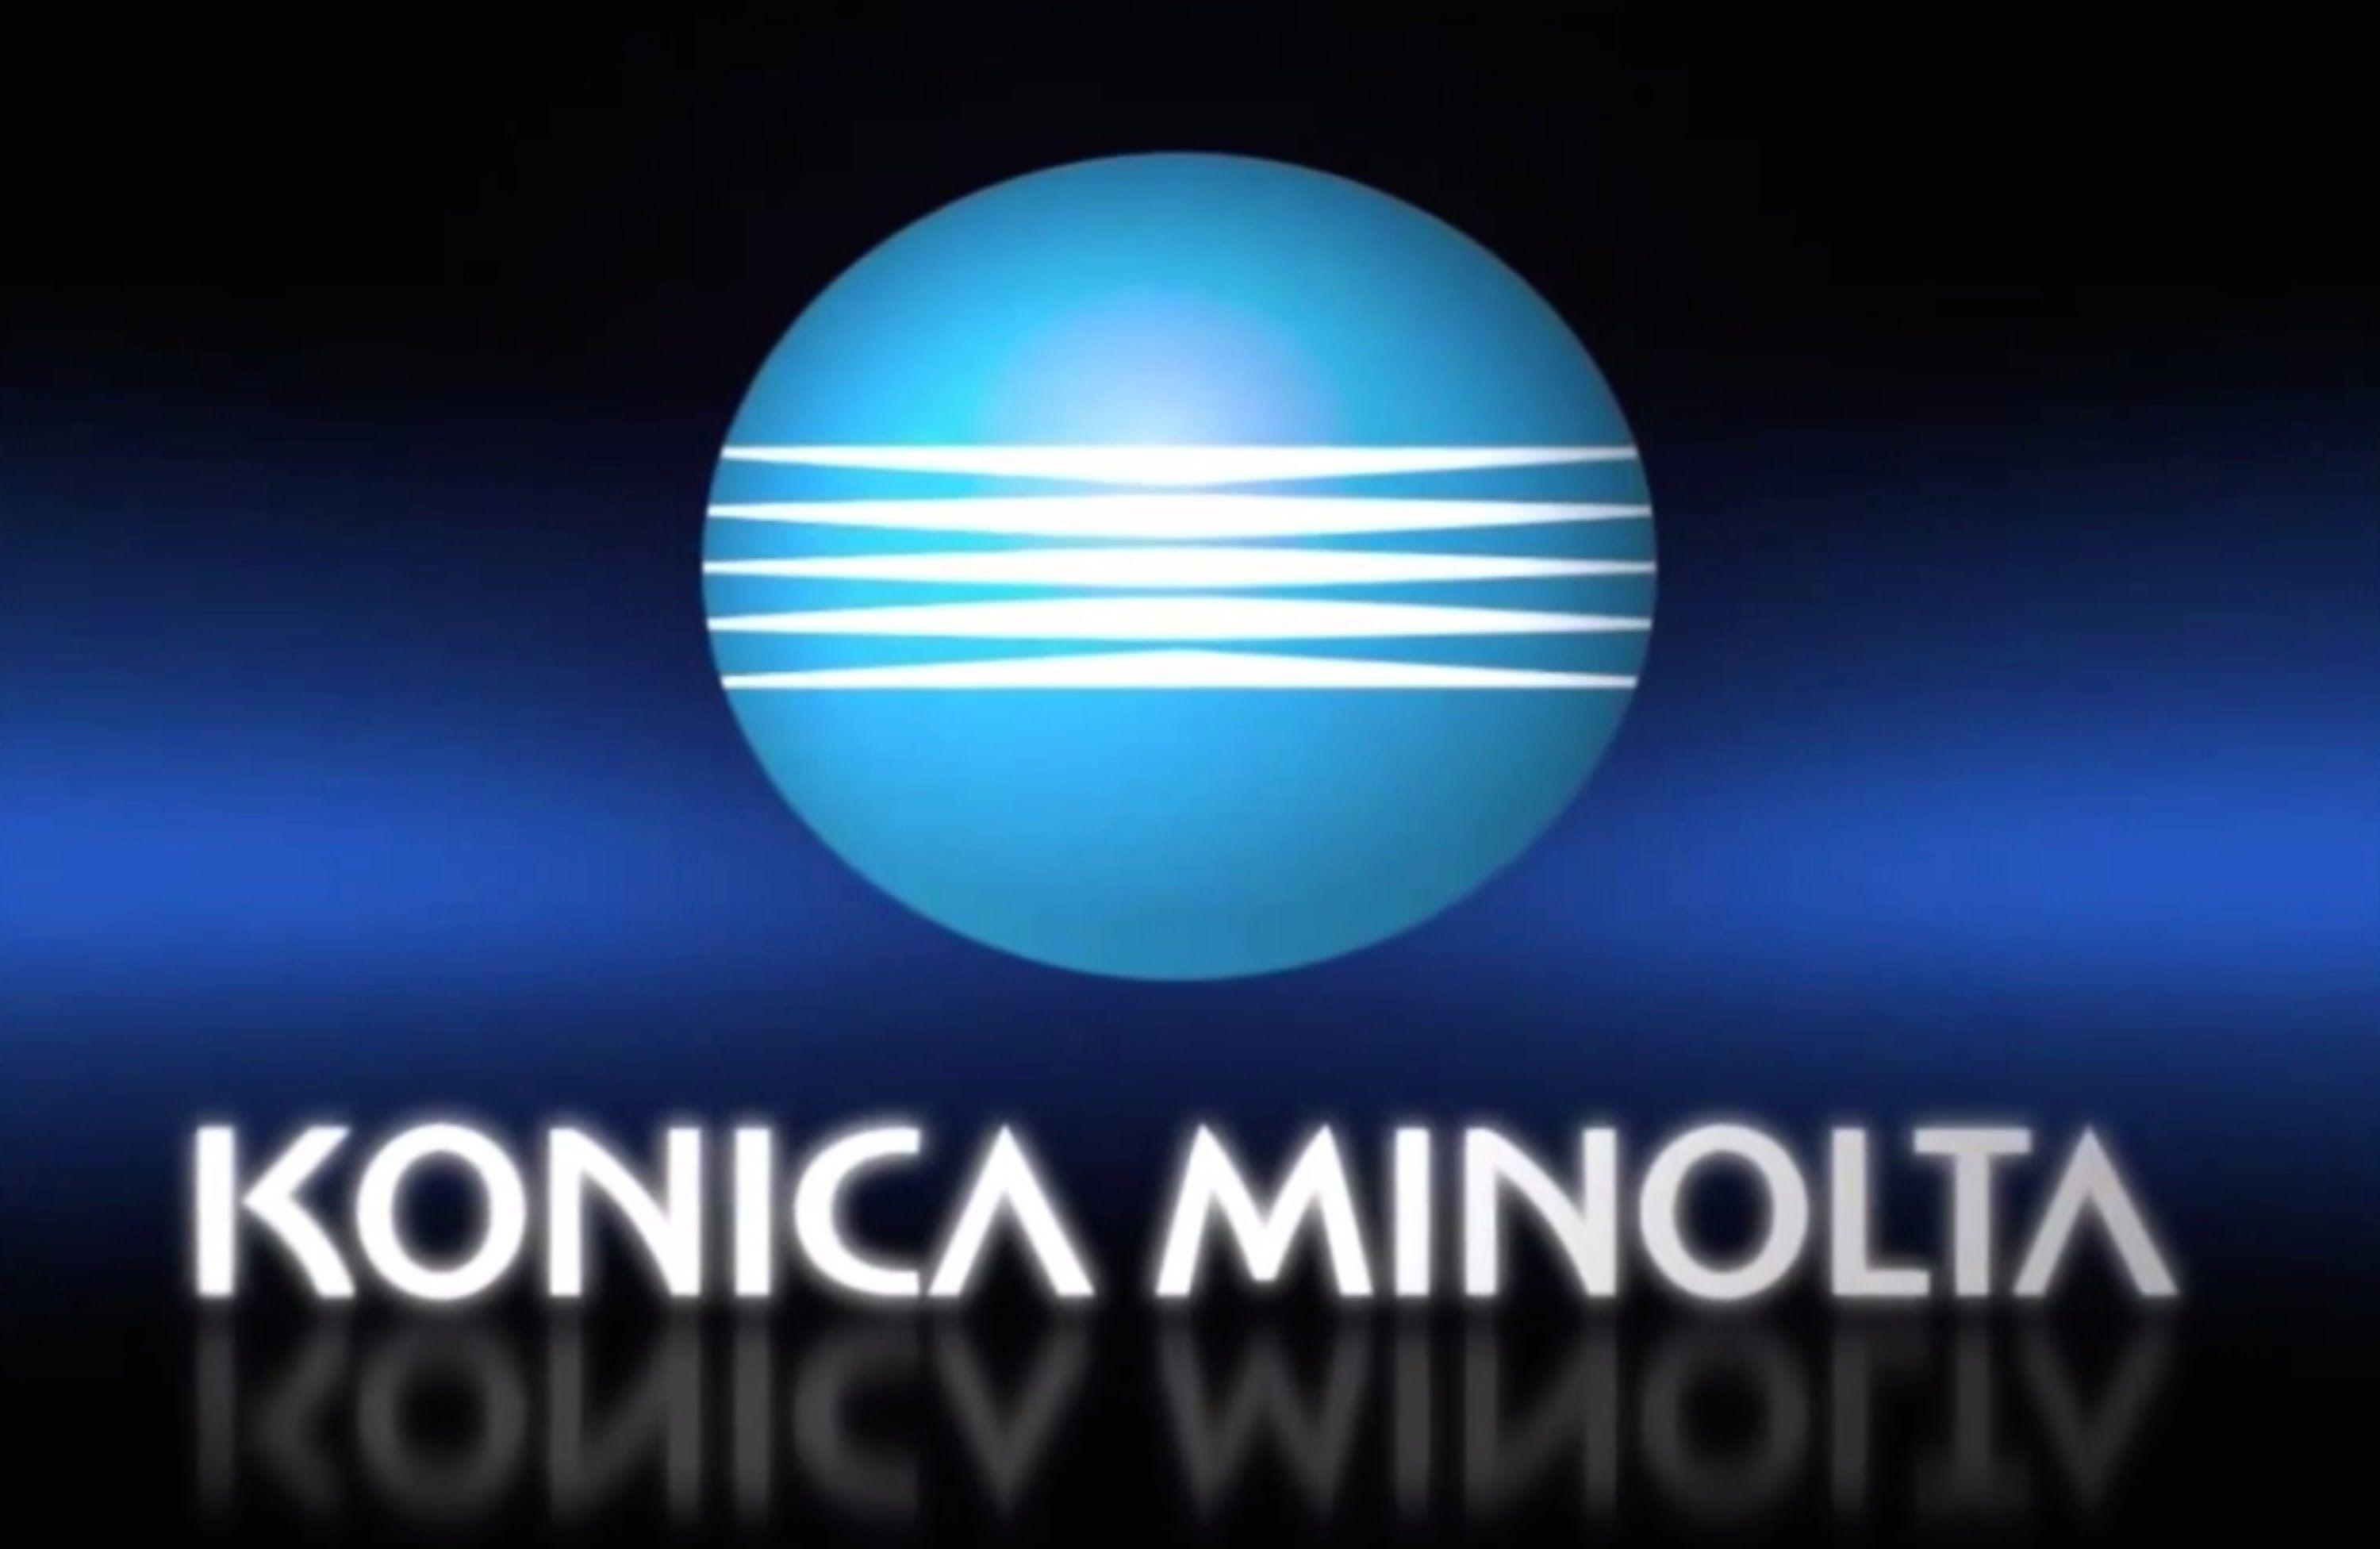 Konica Minolta Logo - Konica Minolta Logo】| Konica Minolta Logo PNG Vector Free Download